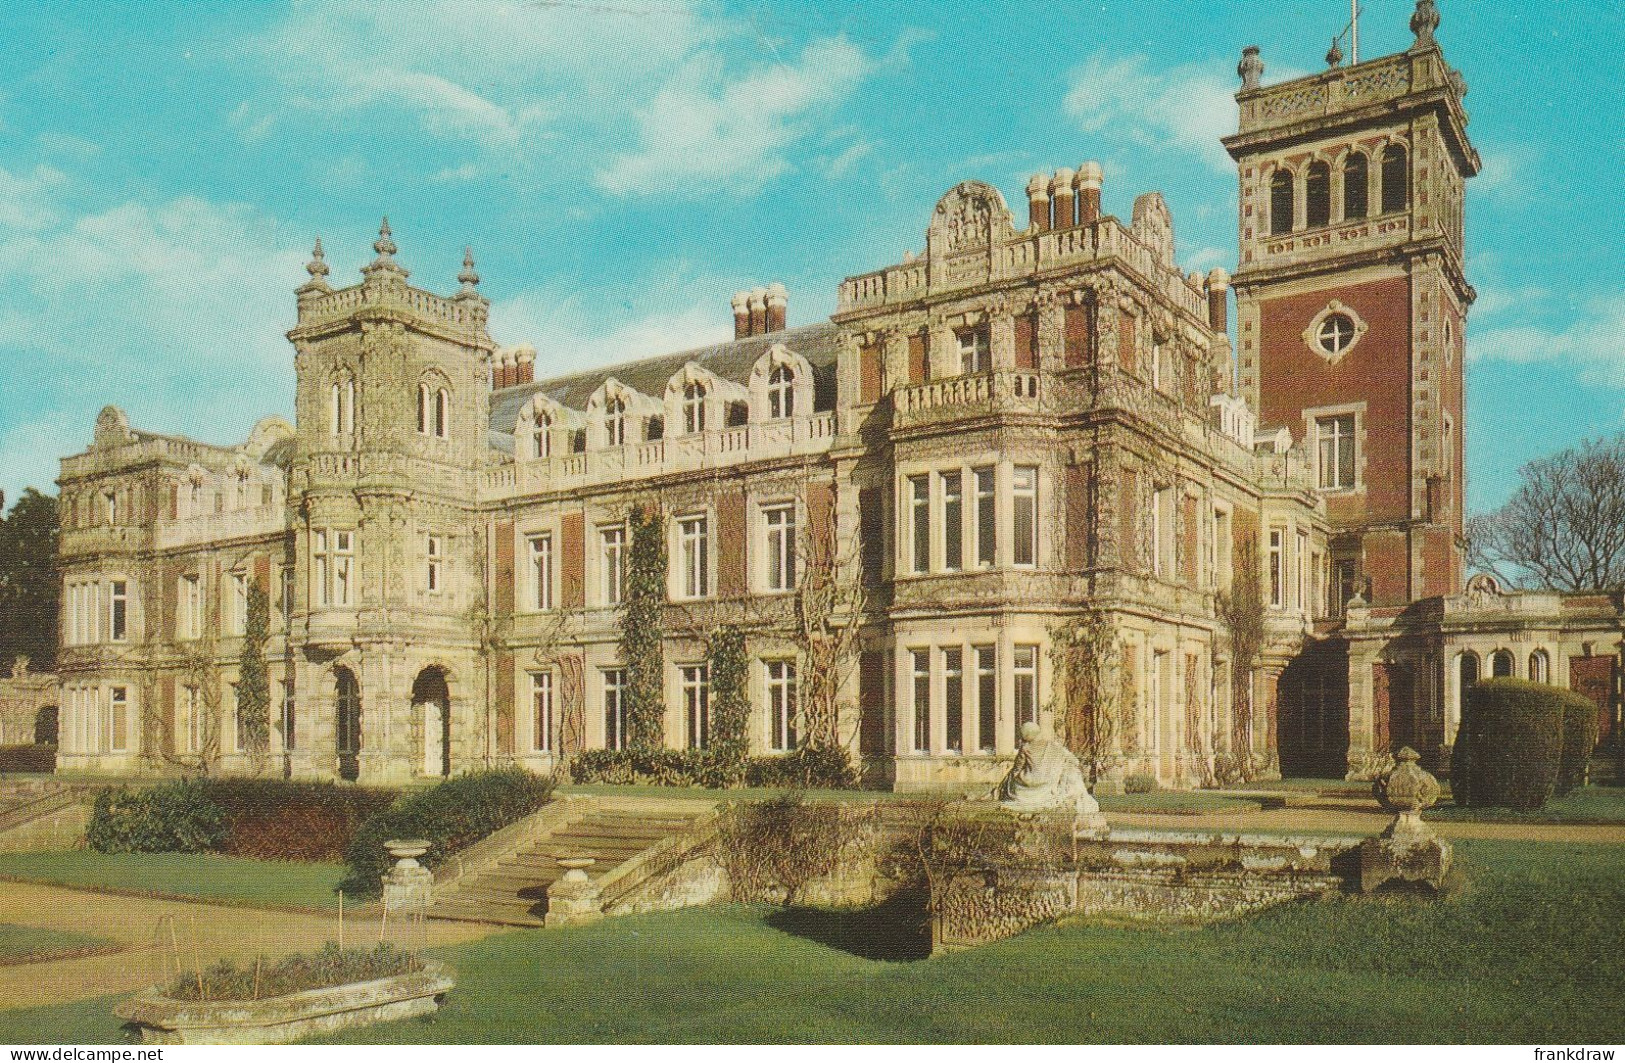 Postcard - West Front, Somerlyton Hall - Card No.ksoml.2 - Very Good - Unclassified